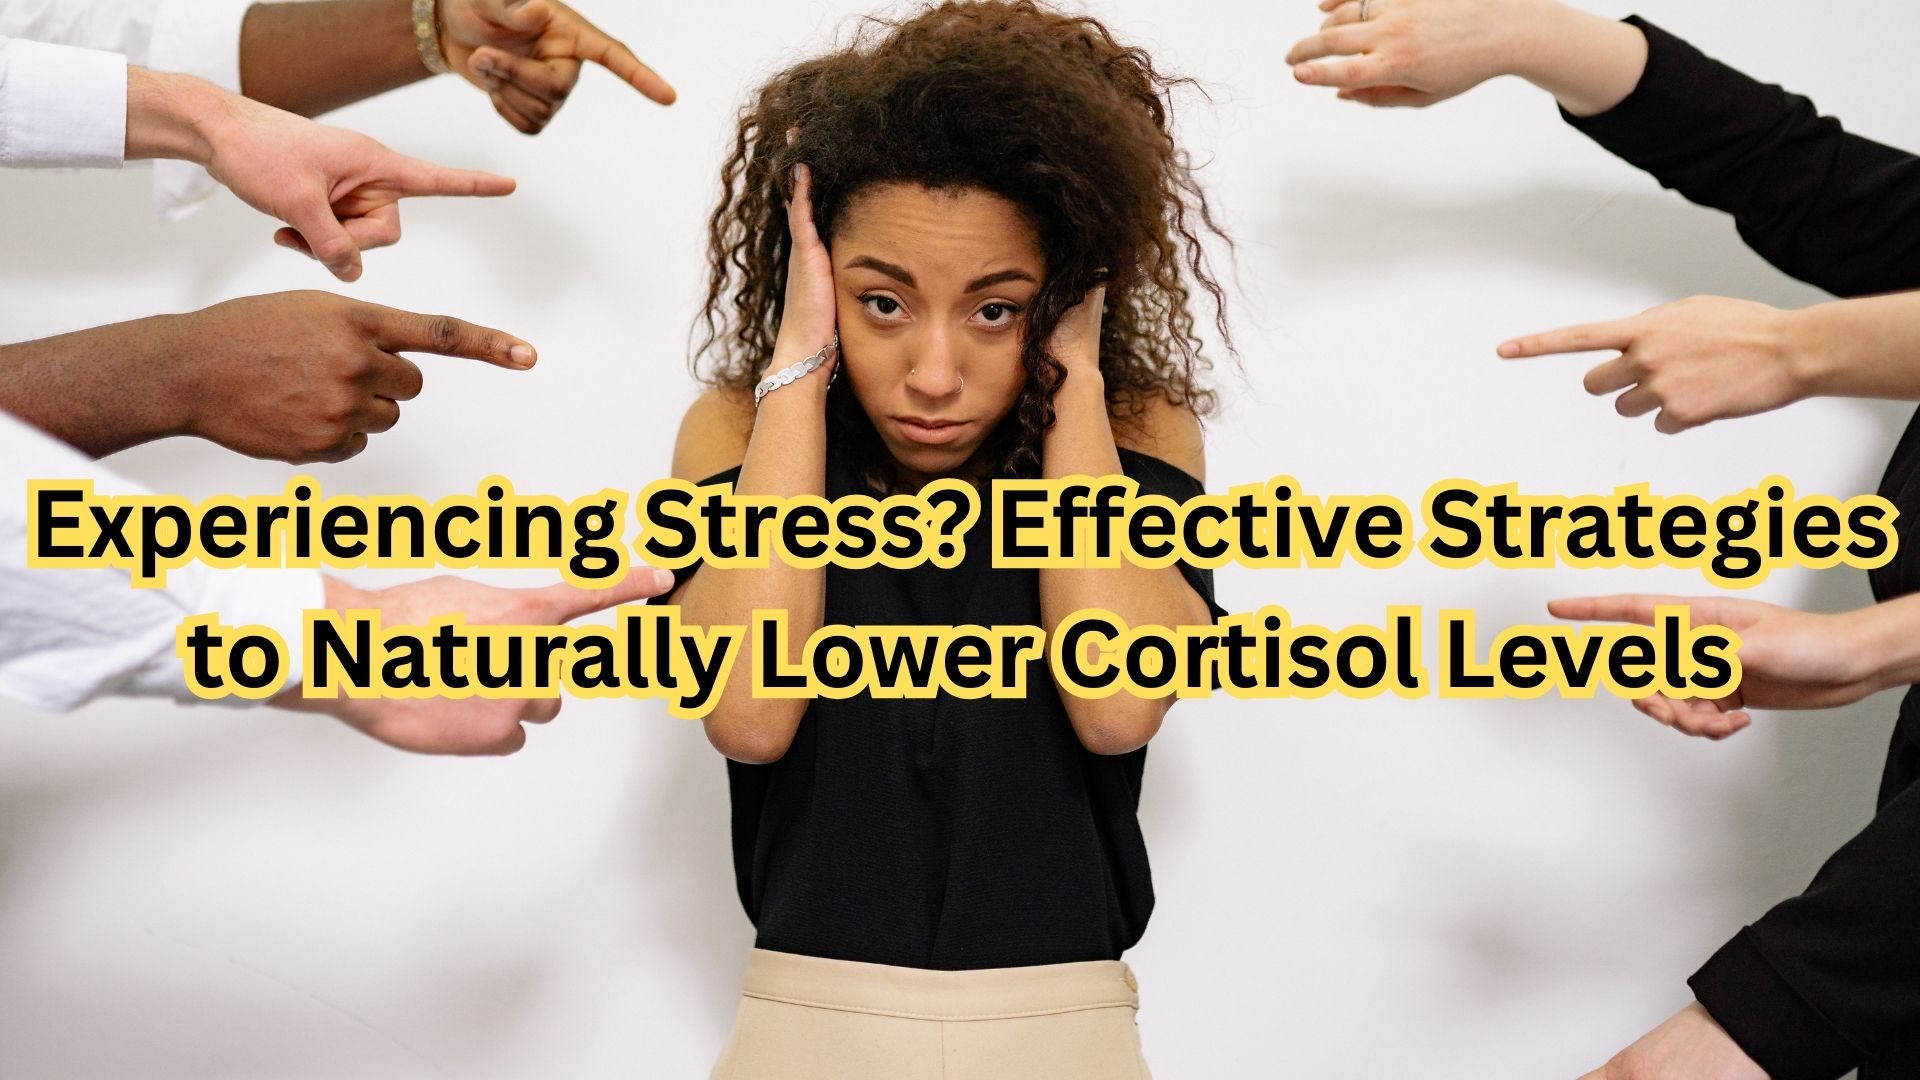 Experiencing Stress? Effective Strategies to Naturally Lower Cortisol Levels